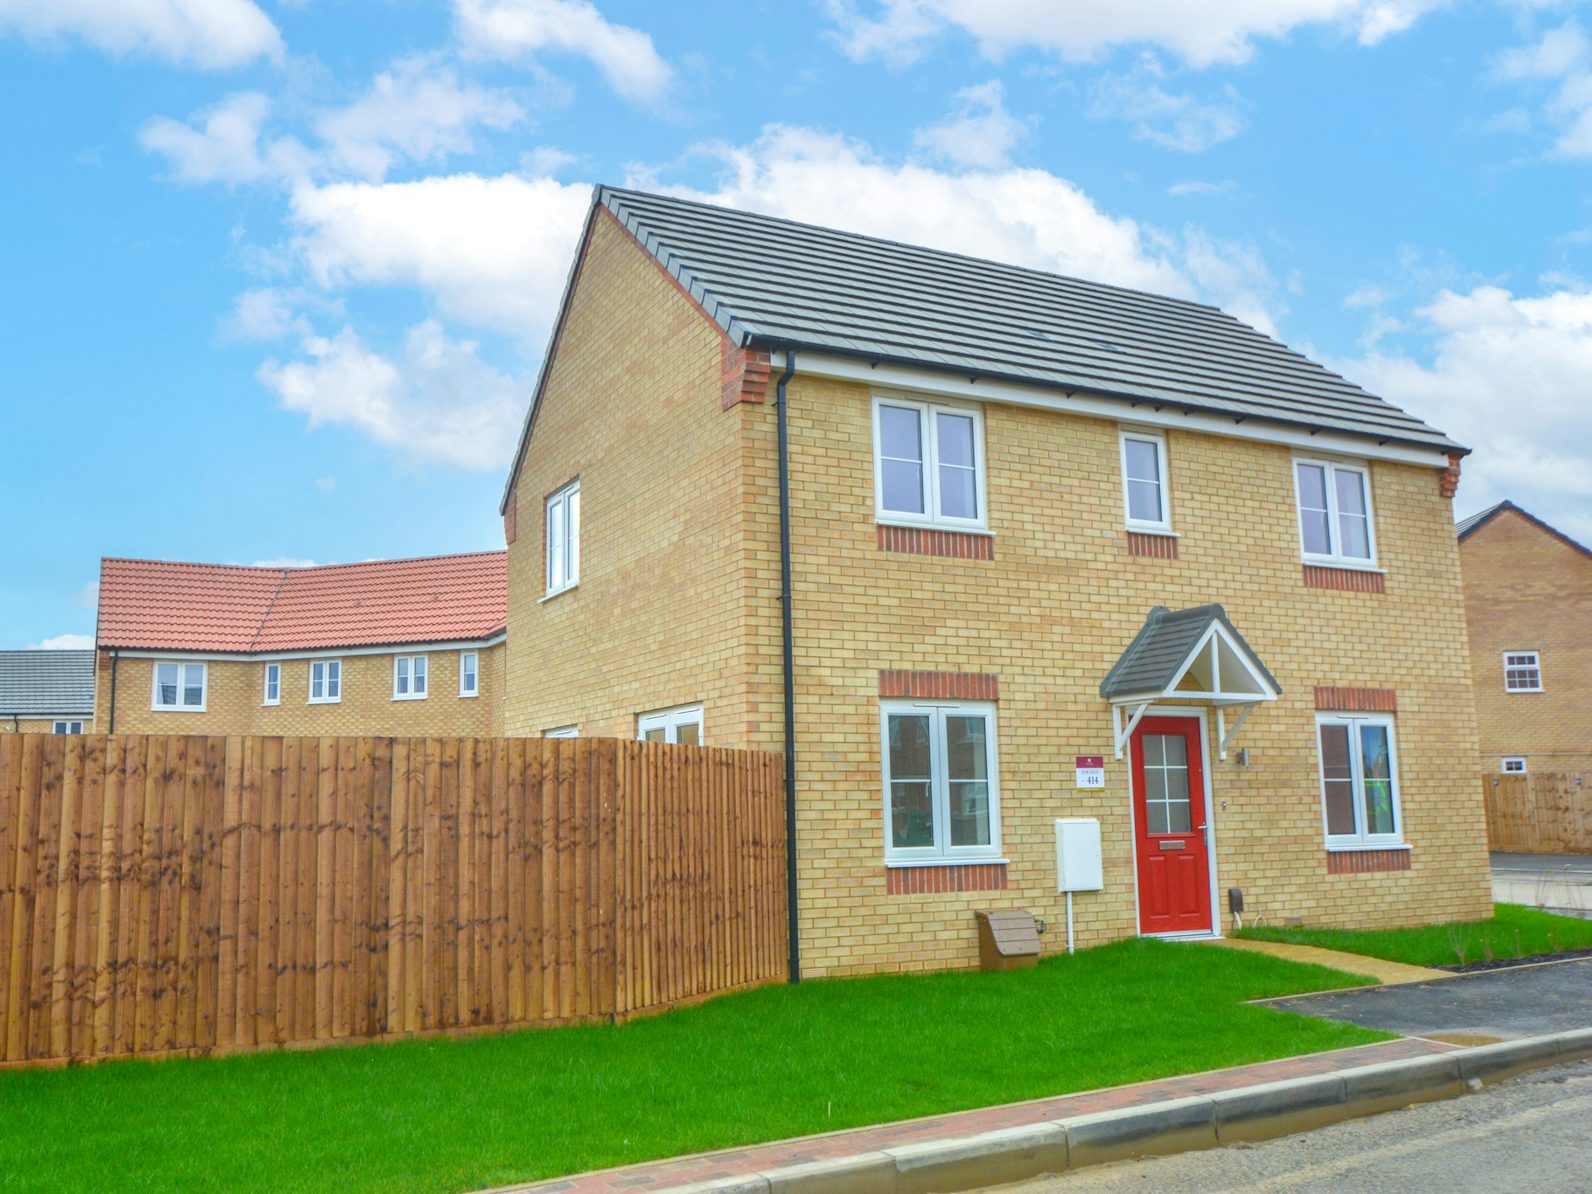 Detached House for sale on Whittlesey Green Whittlesey, PE7